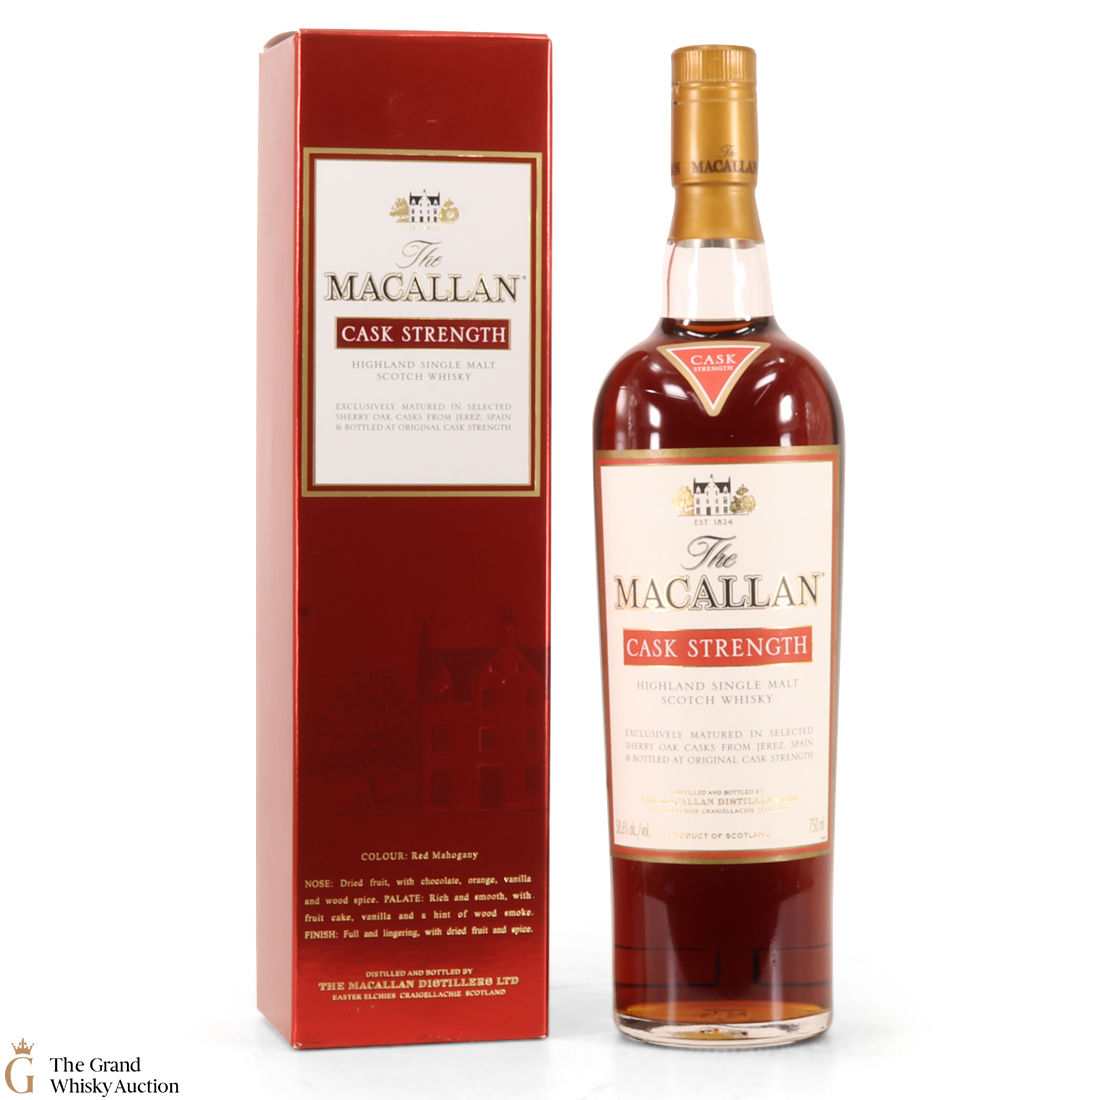 Macallan Cask Strength 750ml 58 6 Auction The Grand Whisky Auction